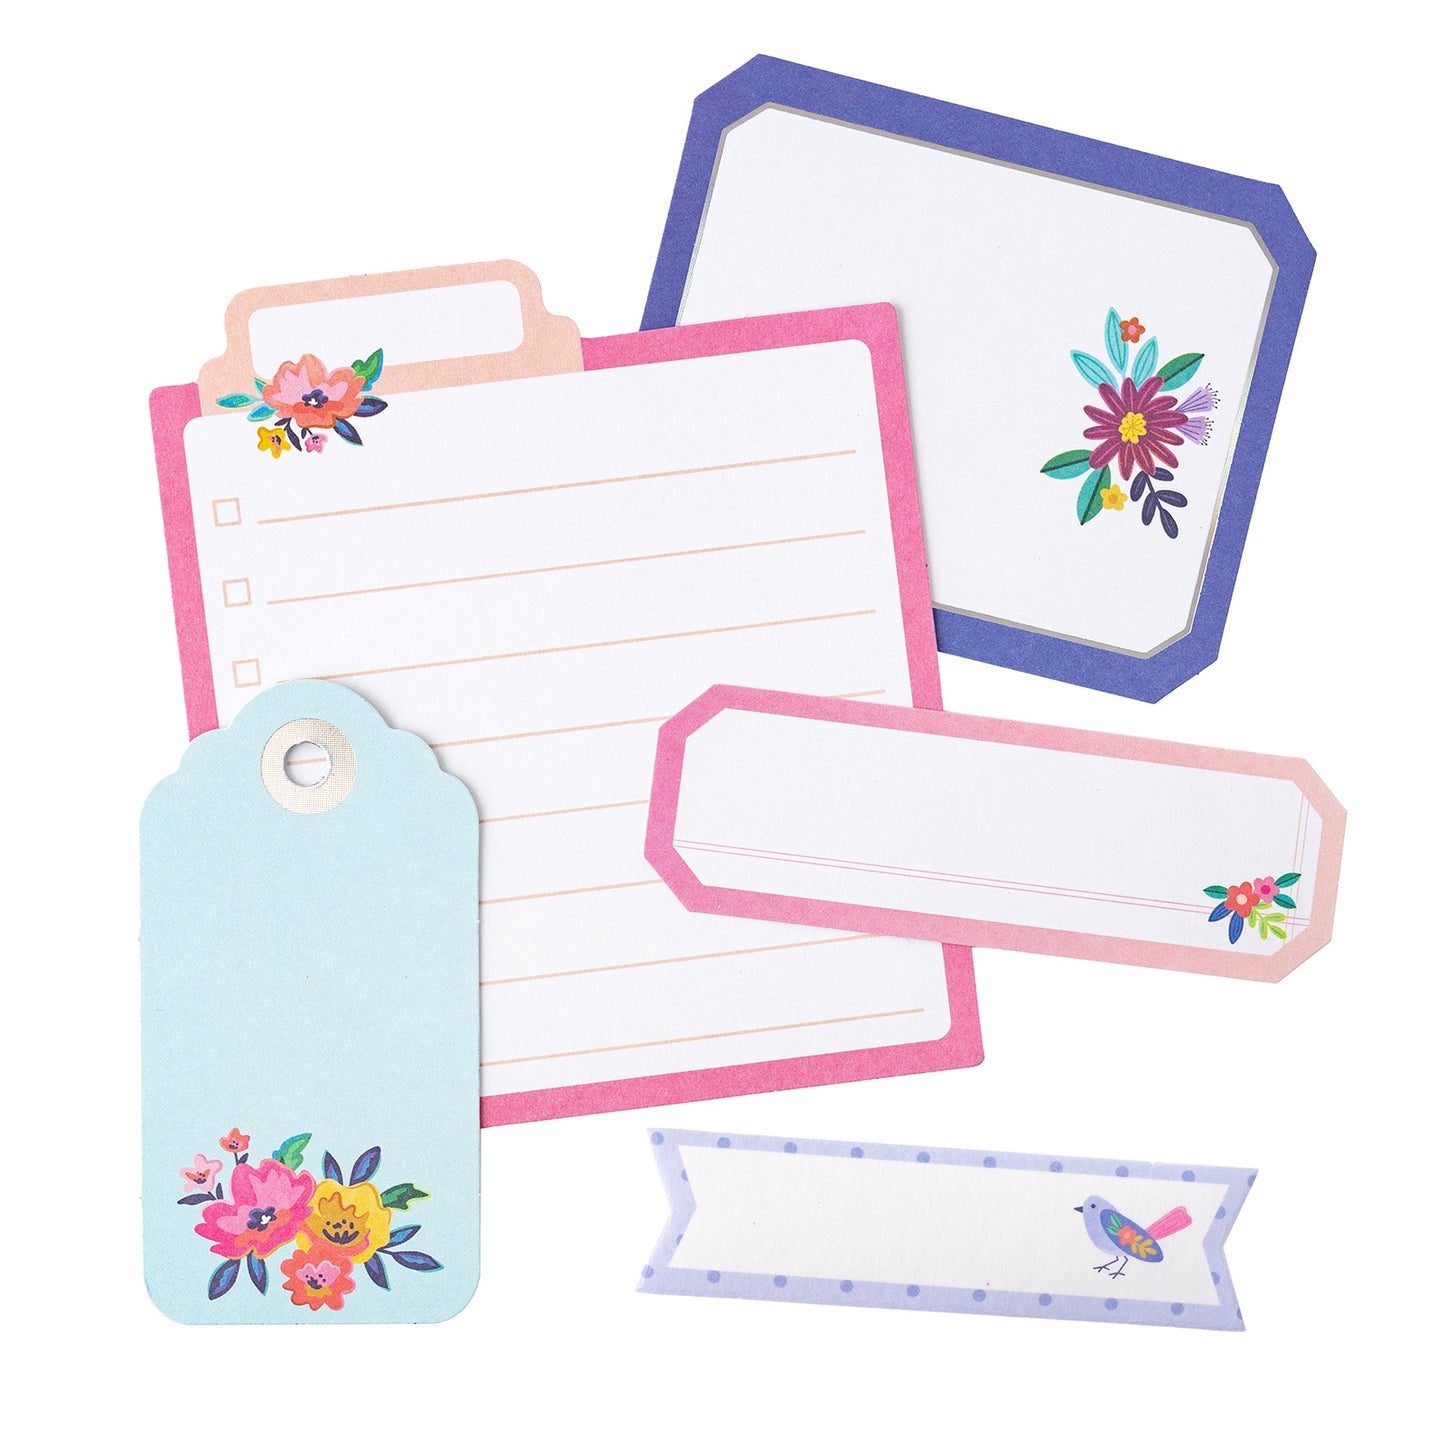 Paige Evans Blooming Wild Journaling Embellishments-W/Holographic Foil Accents